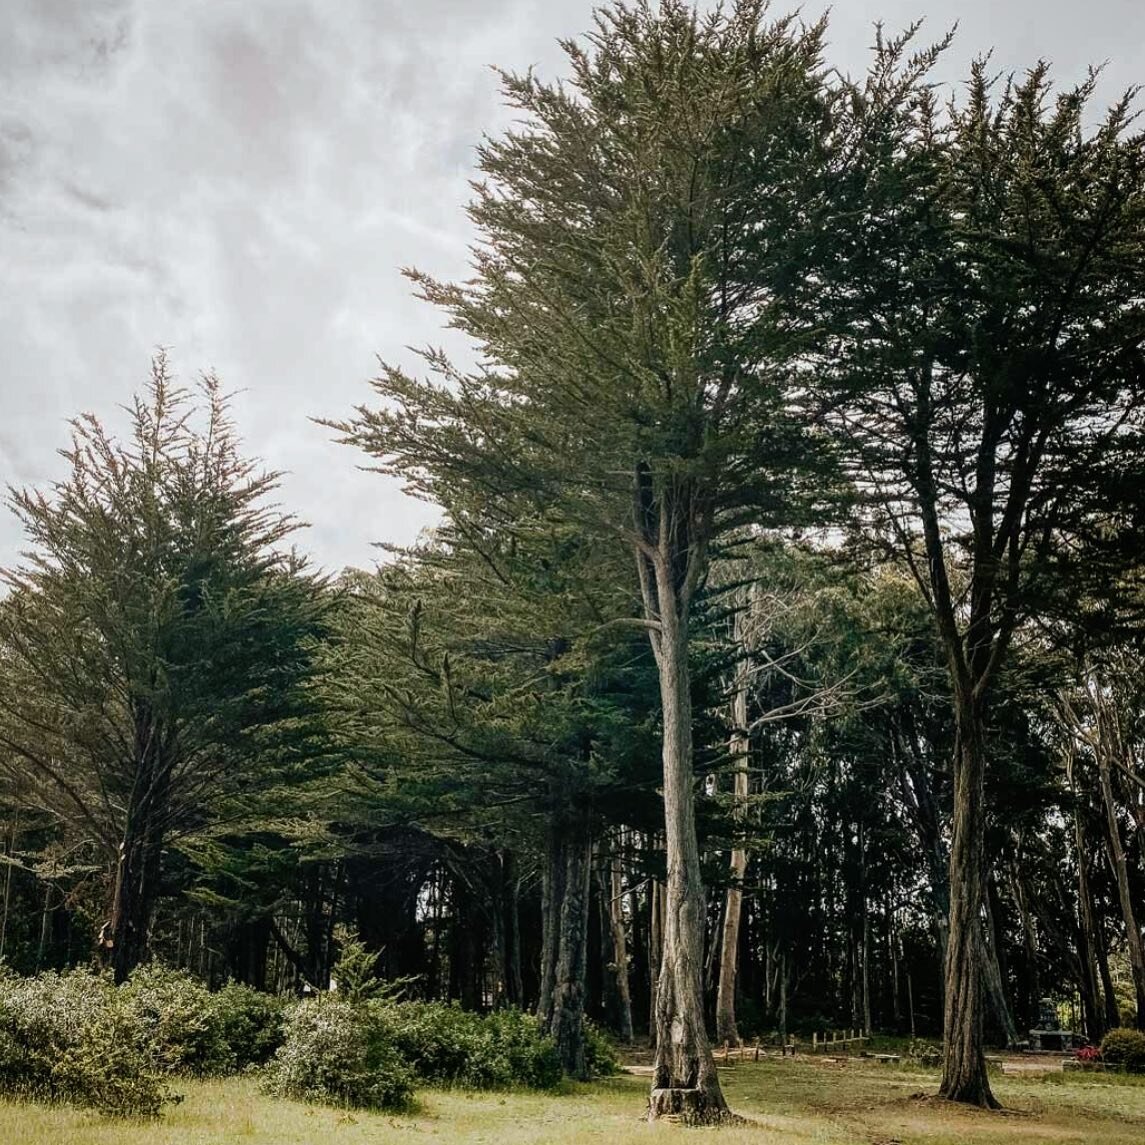 Magical place indeed ❤️ we hope you had a well rested weekend. Off to the new week ahead. Keep fighting and stay safe everyone.
We miss you all! 

#weddingdestination #springranchmendocino #wedding #mendocino #coastalpreserve #coastalwedding #califor